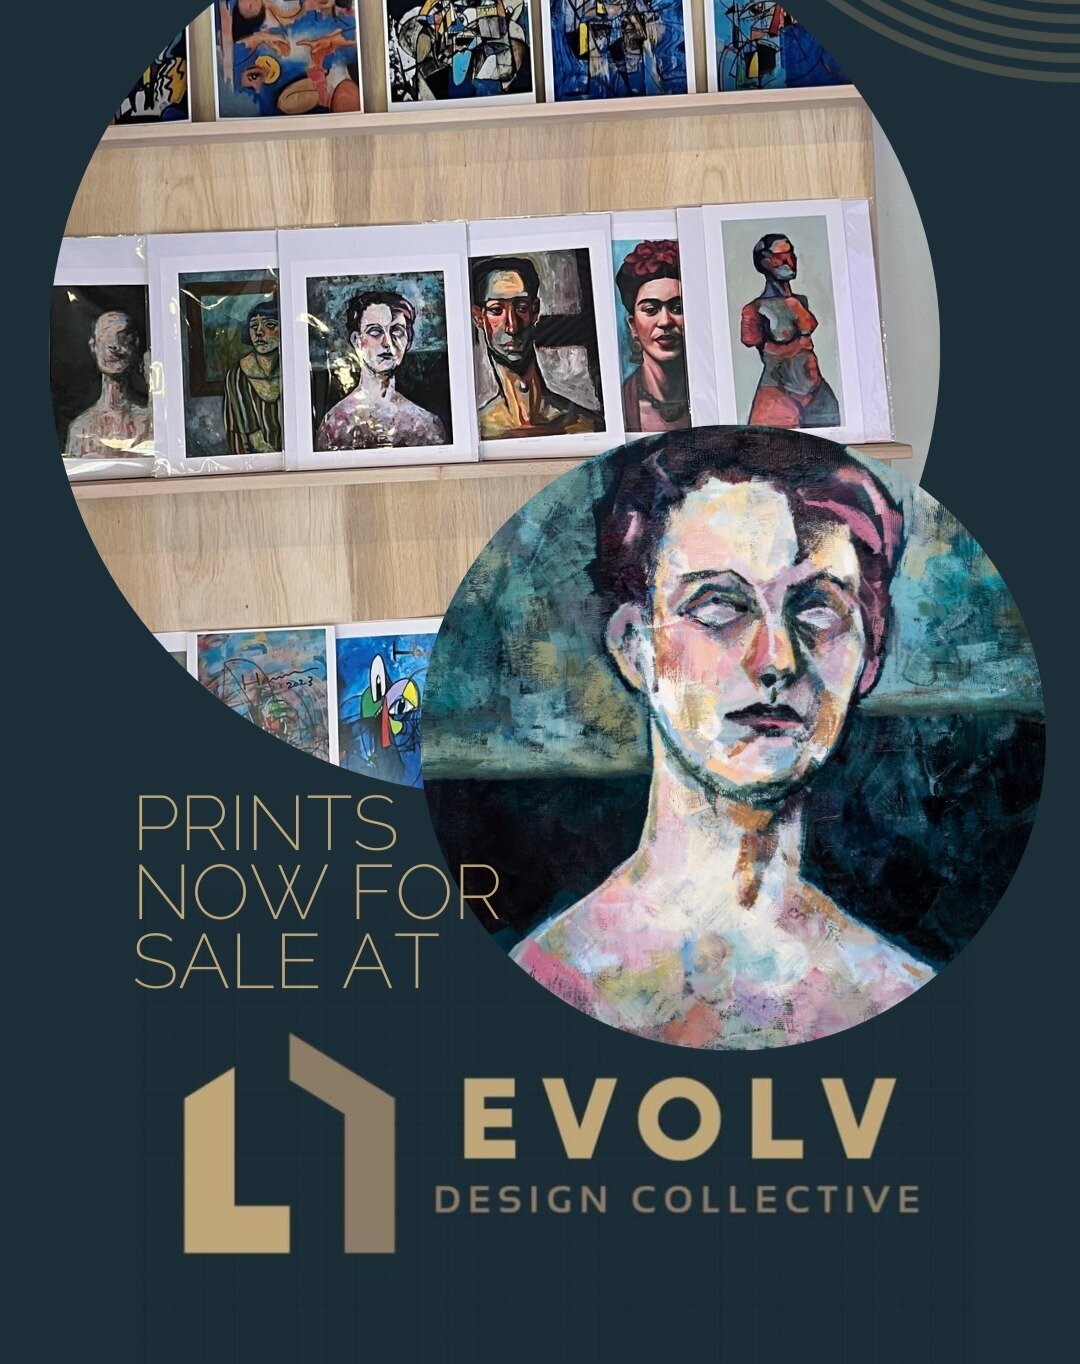 Now selling prints at @evolvdesigncollective in Downtown Kennewick at 116 W Kennewick Avenue! Come see my work alongside originals and prints by @hannumfineart. Thanks you to Evolv for showcasing my work!

#artgallery #evolvdesigncollective #tricitie